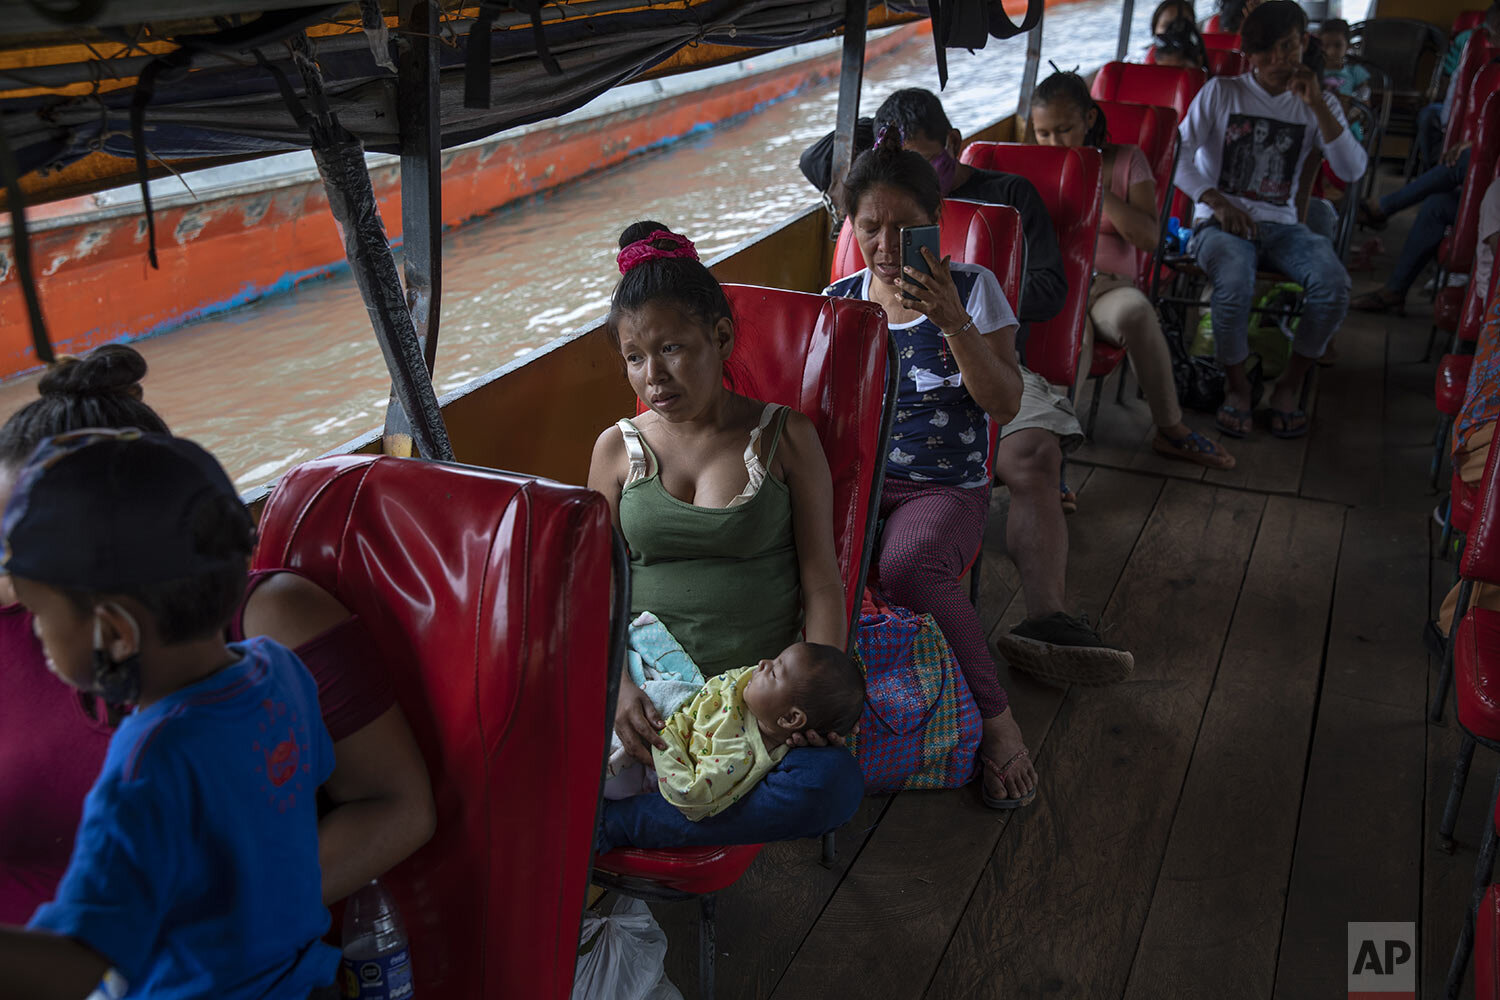  Amazonian residents wait for a public boat to leave the Pucallpa port, in Peru’s Ucayali region, Monday, Oct. 4, 2020. (AP Photo/Rodrigo Abd) 